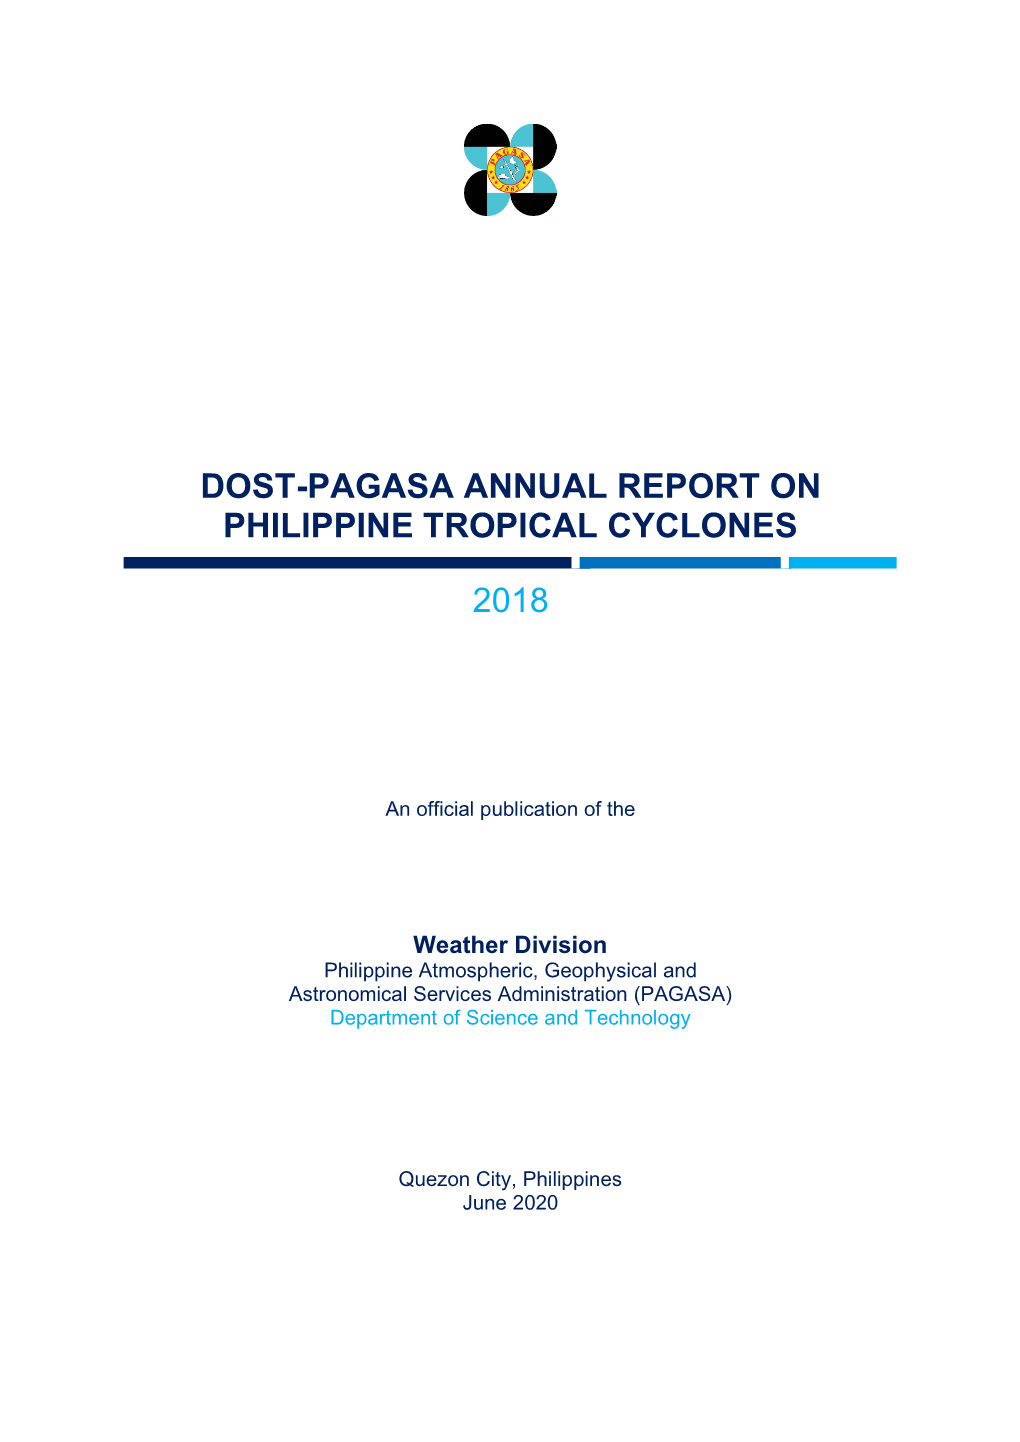 Dost-Pagasa Annual Report on Philippine Tropical Cyclones